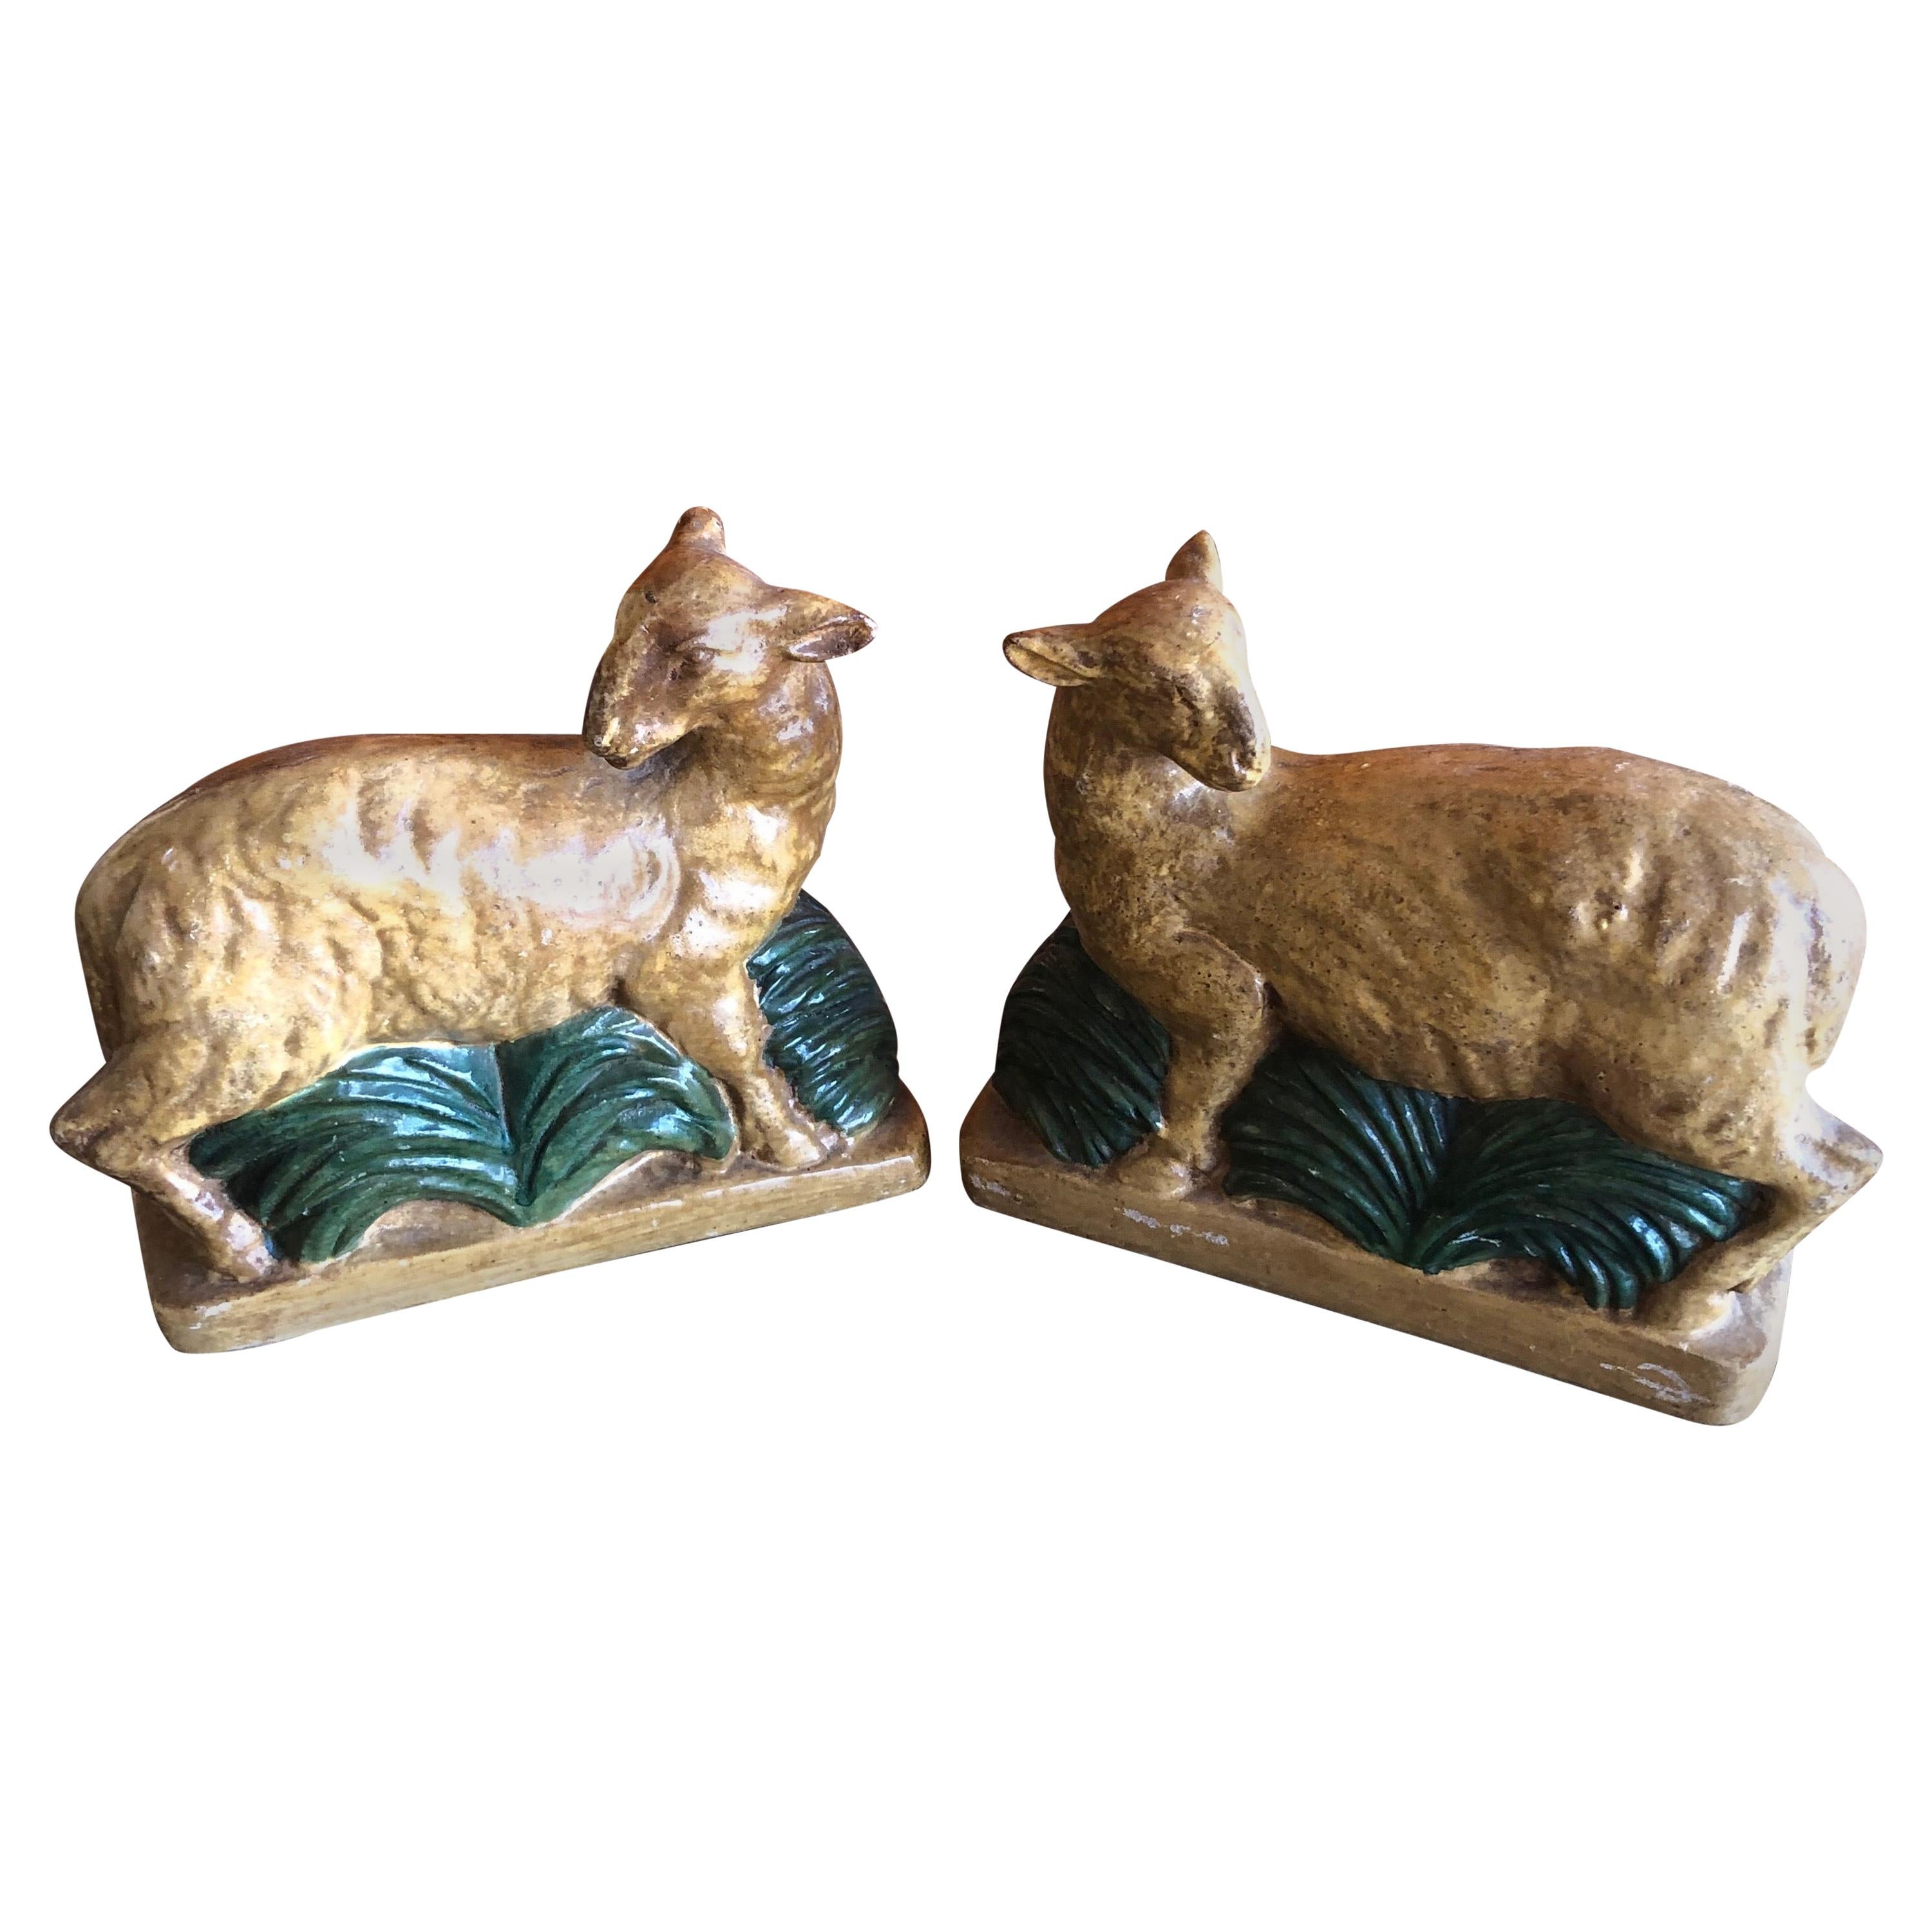 Vintage Pair of Plaster Lamb / Sheep Bookends by Borghese of Italy